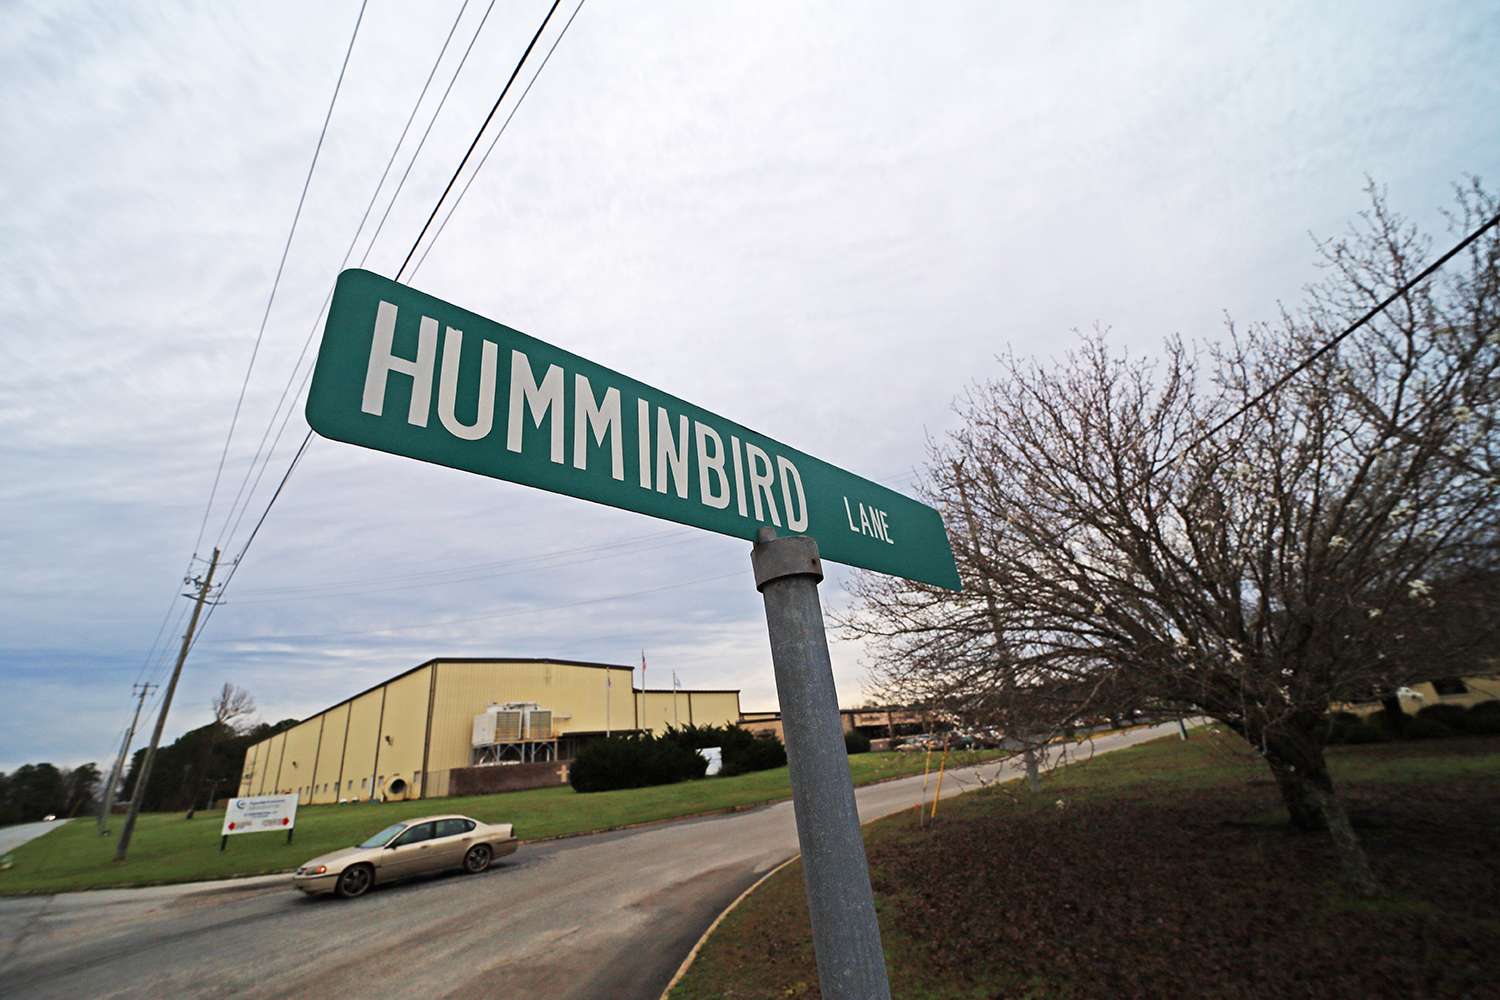 Before the Bassmaster Elite Series event on Lake Eufaula, Matt Herren made a trip to the Humminbird manufacturing facility in Eufaula, Ala. </p>
<p>If you'd like to see a video of Matt's tour, follow this link: <a href=